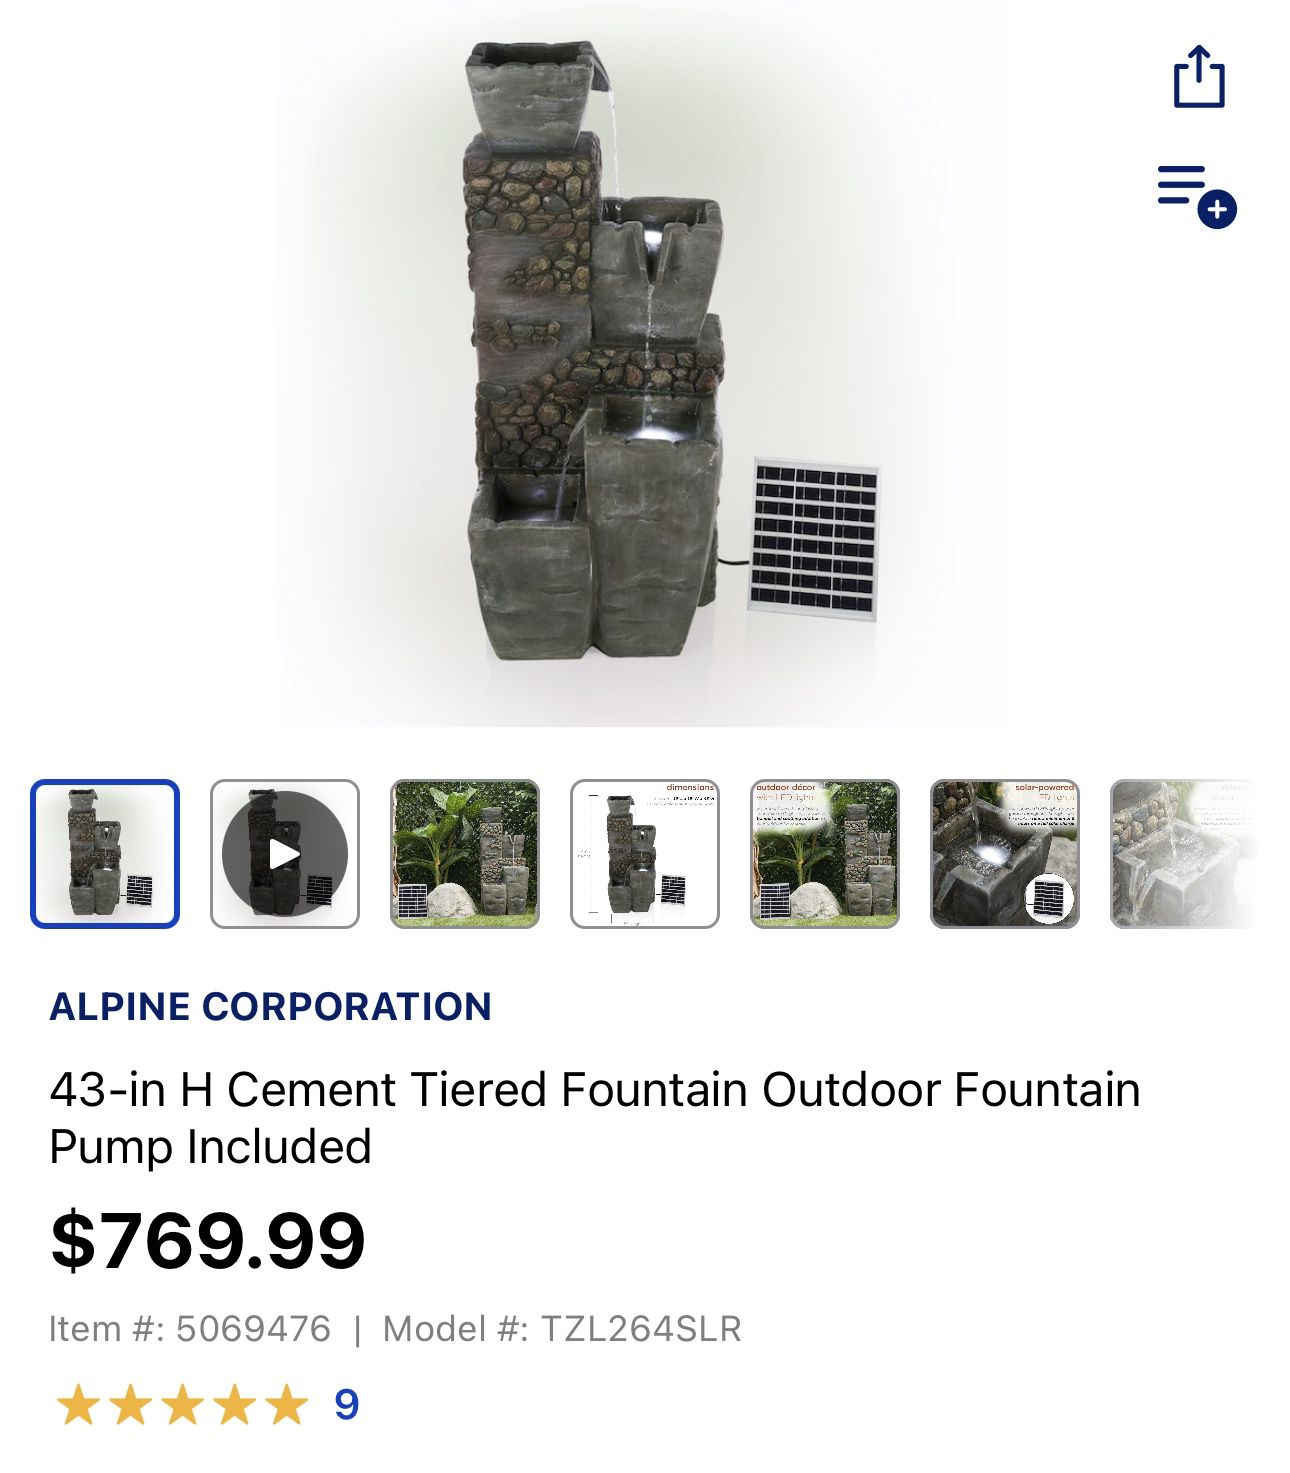 43-in H Cement Tiered Fountain Outdoor Fountain Pump Included